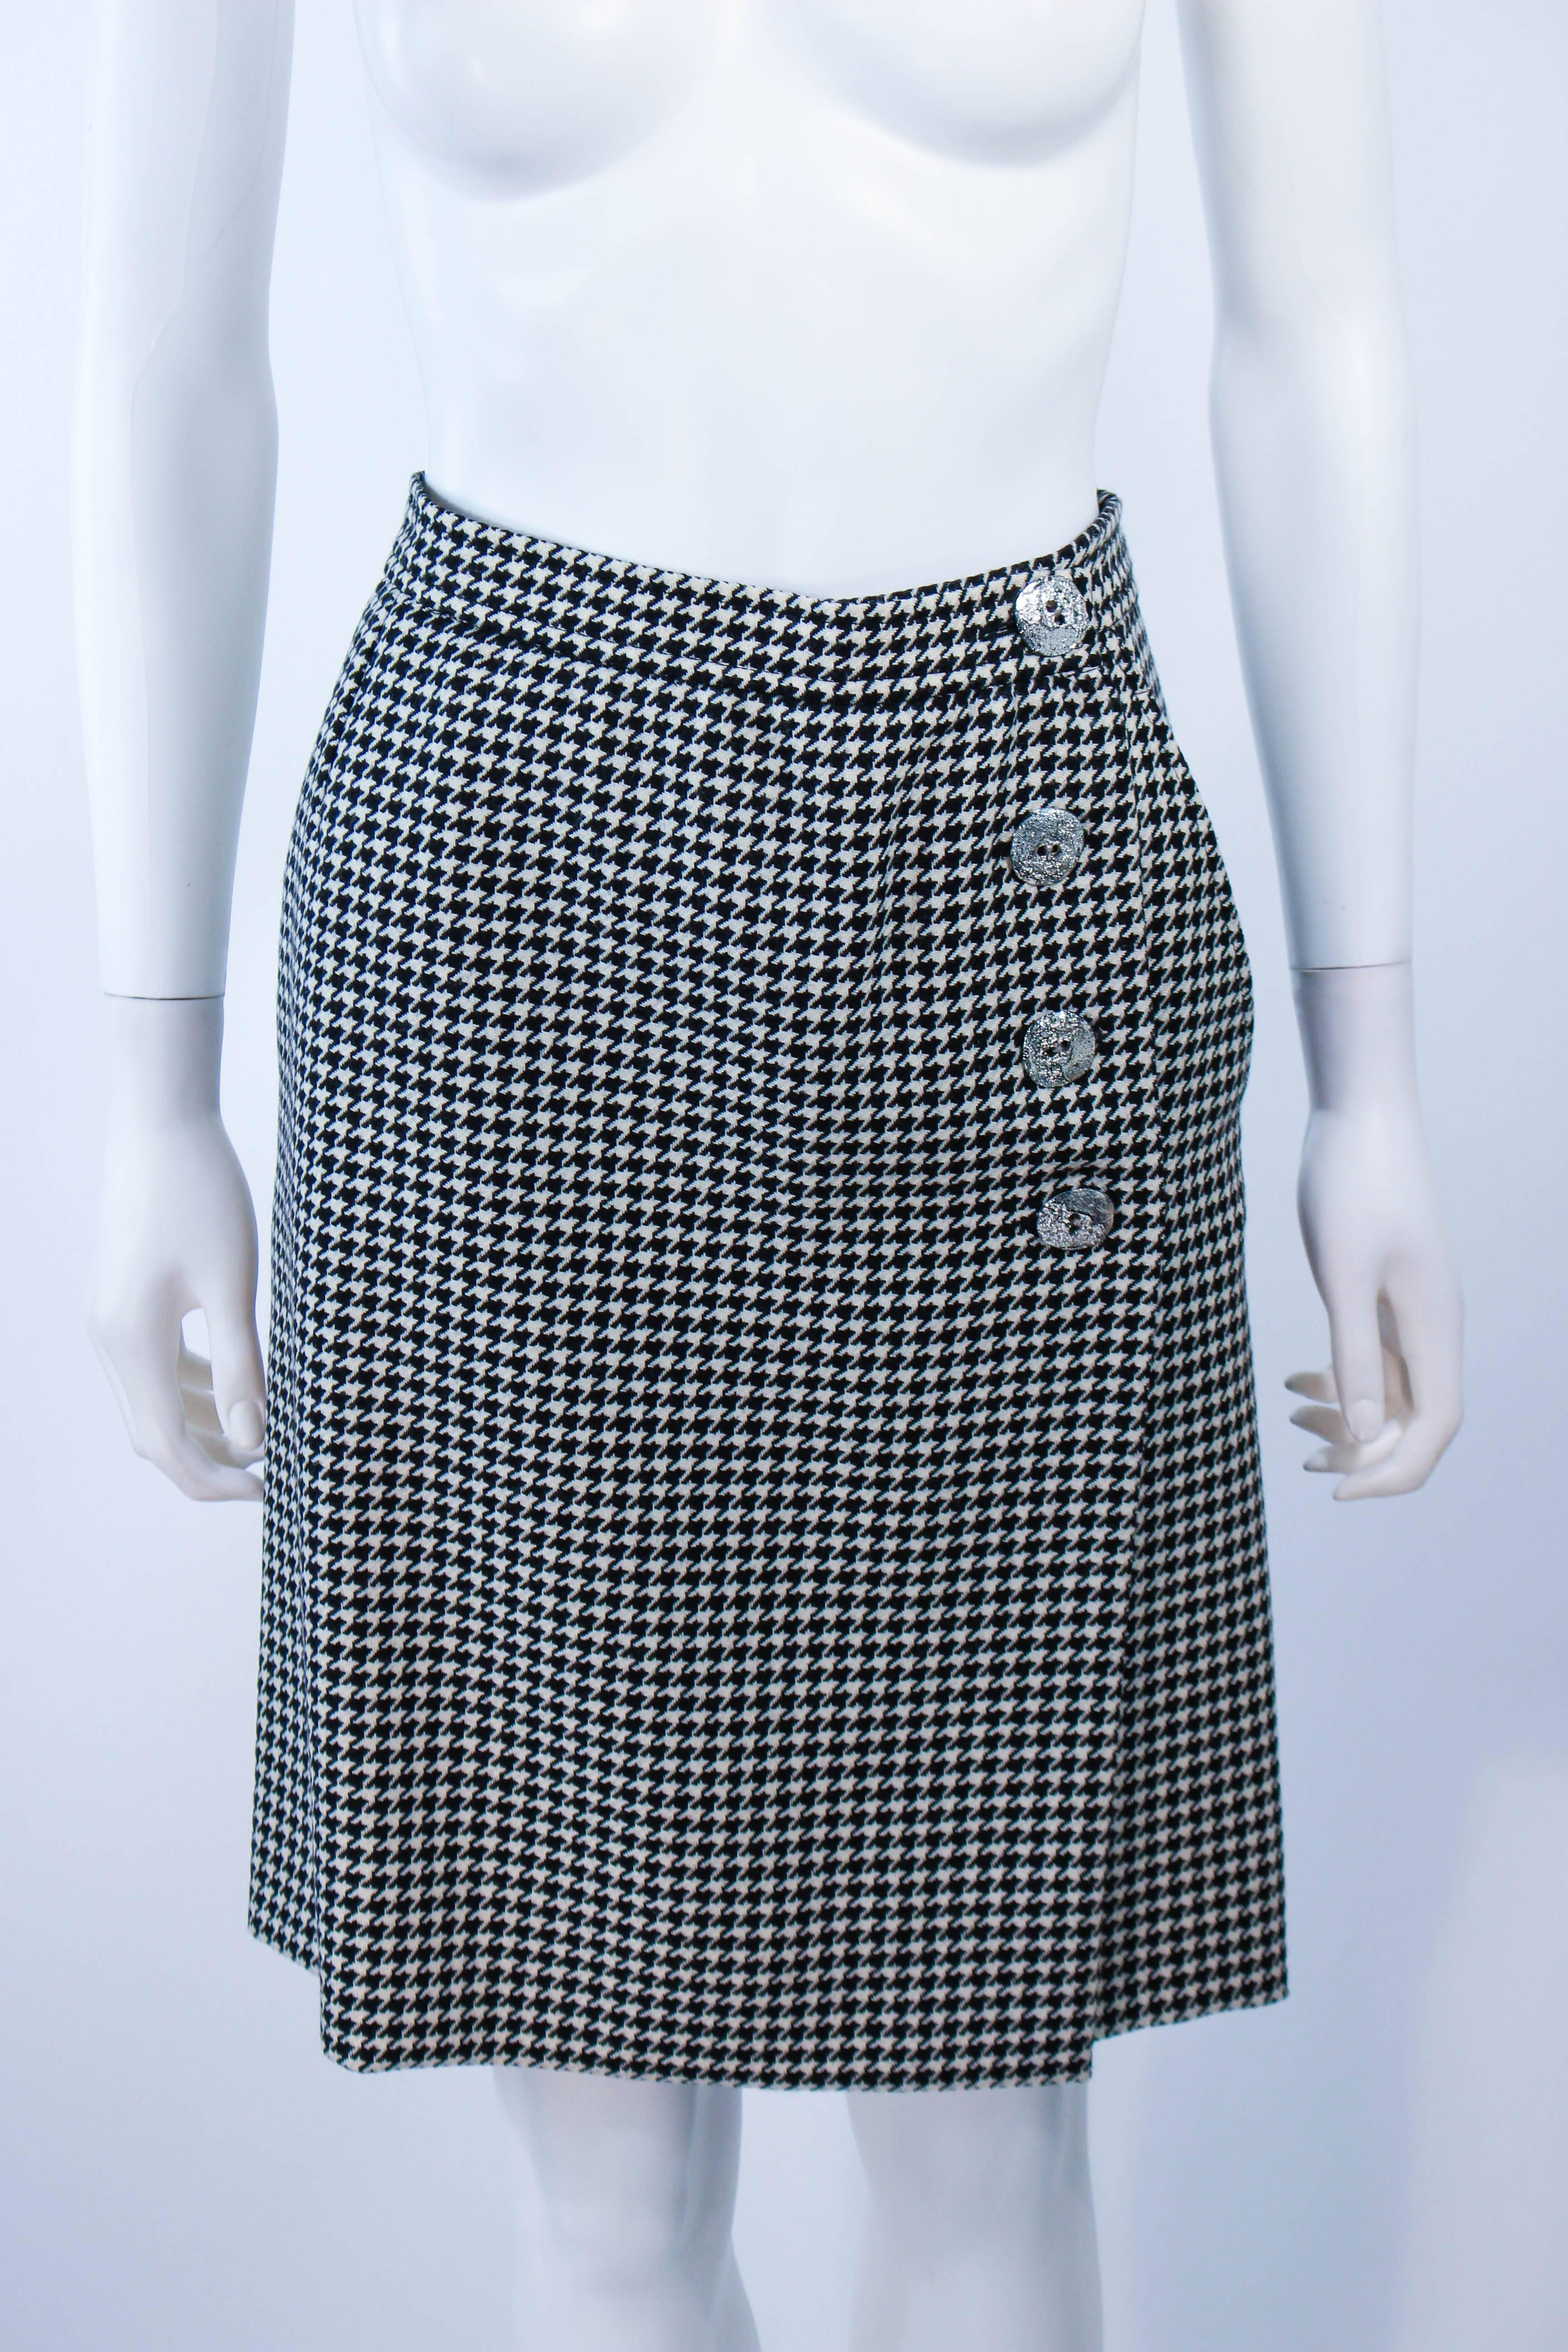 YVES SAINT LAURENT Black and White Houndstooth Skirt Suit Size 8 10 For Sale 4